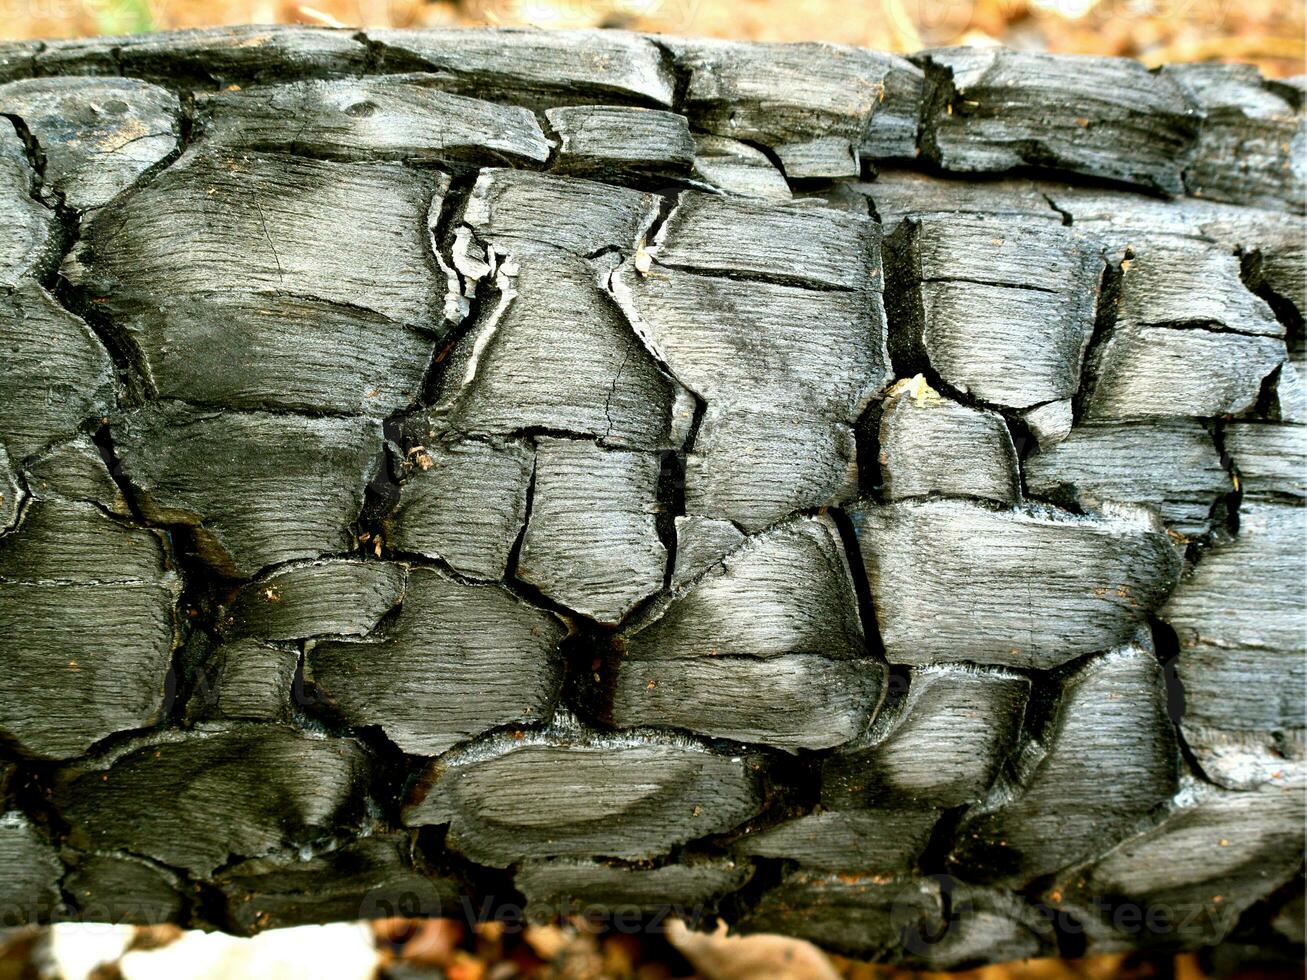 The logs were charred burned wood texture and details on the surface of the charcoal photo